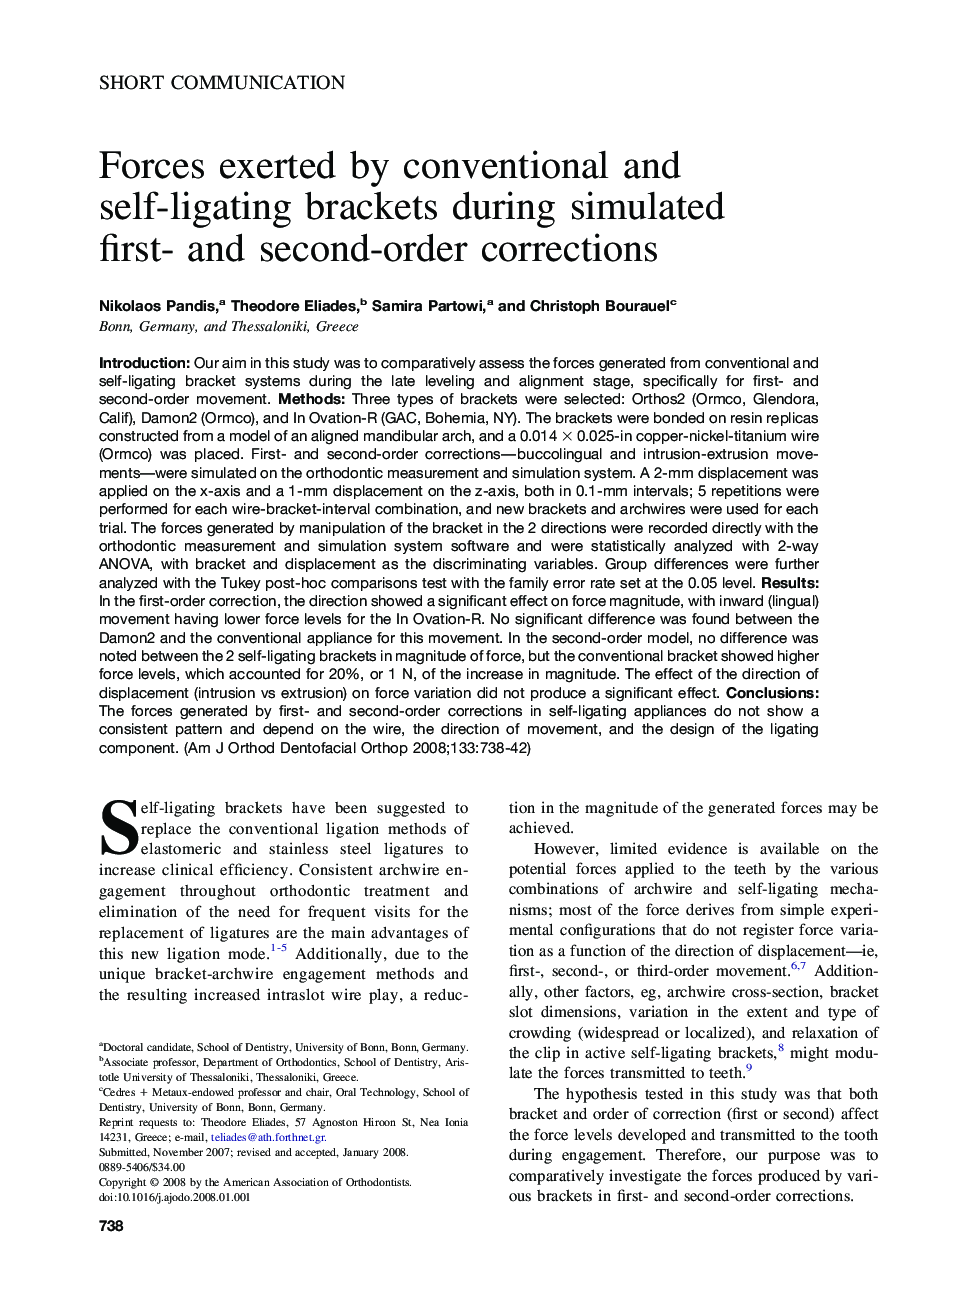 Forces exerted by conventional and self-ligating brackets during simulated first- and second-order corrections